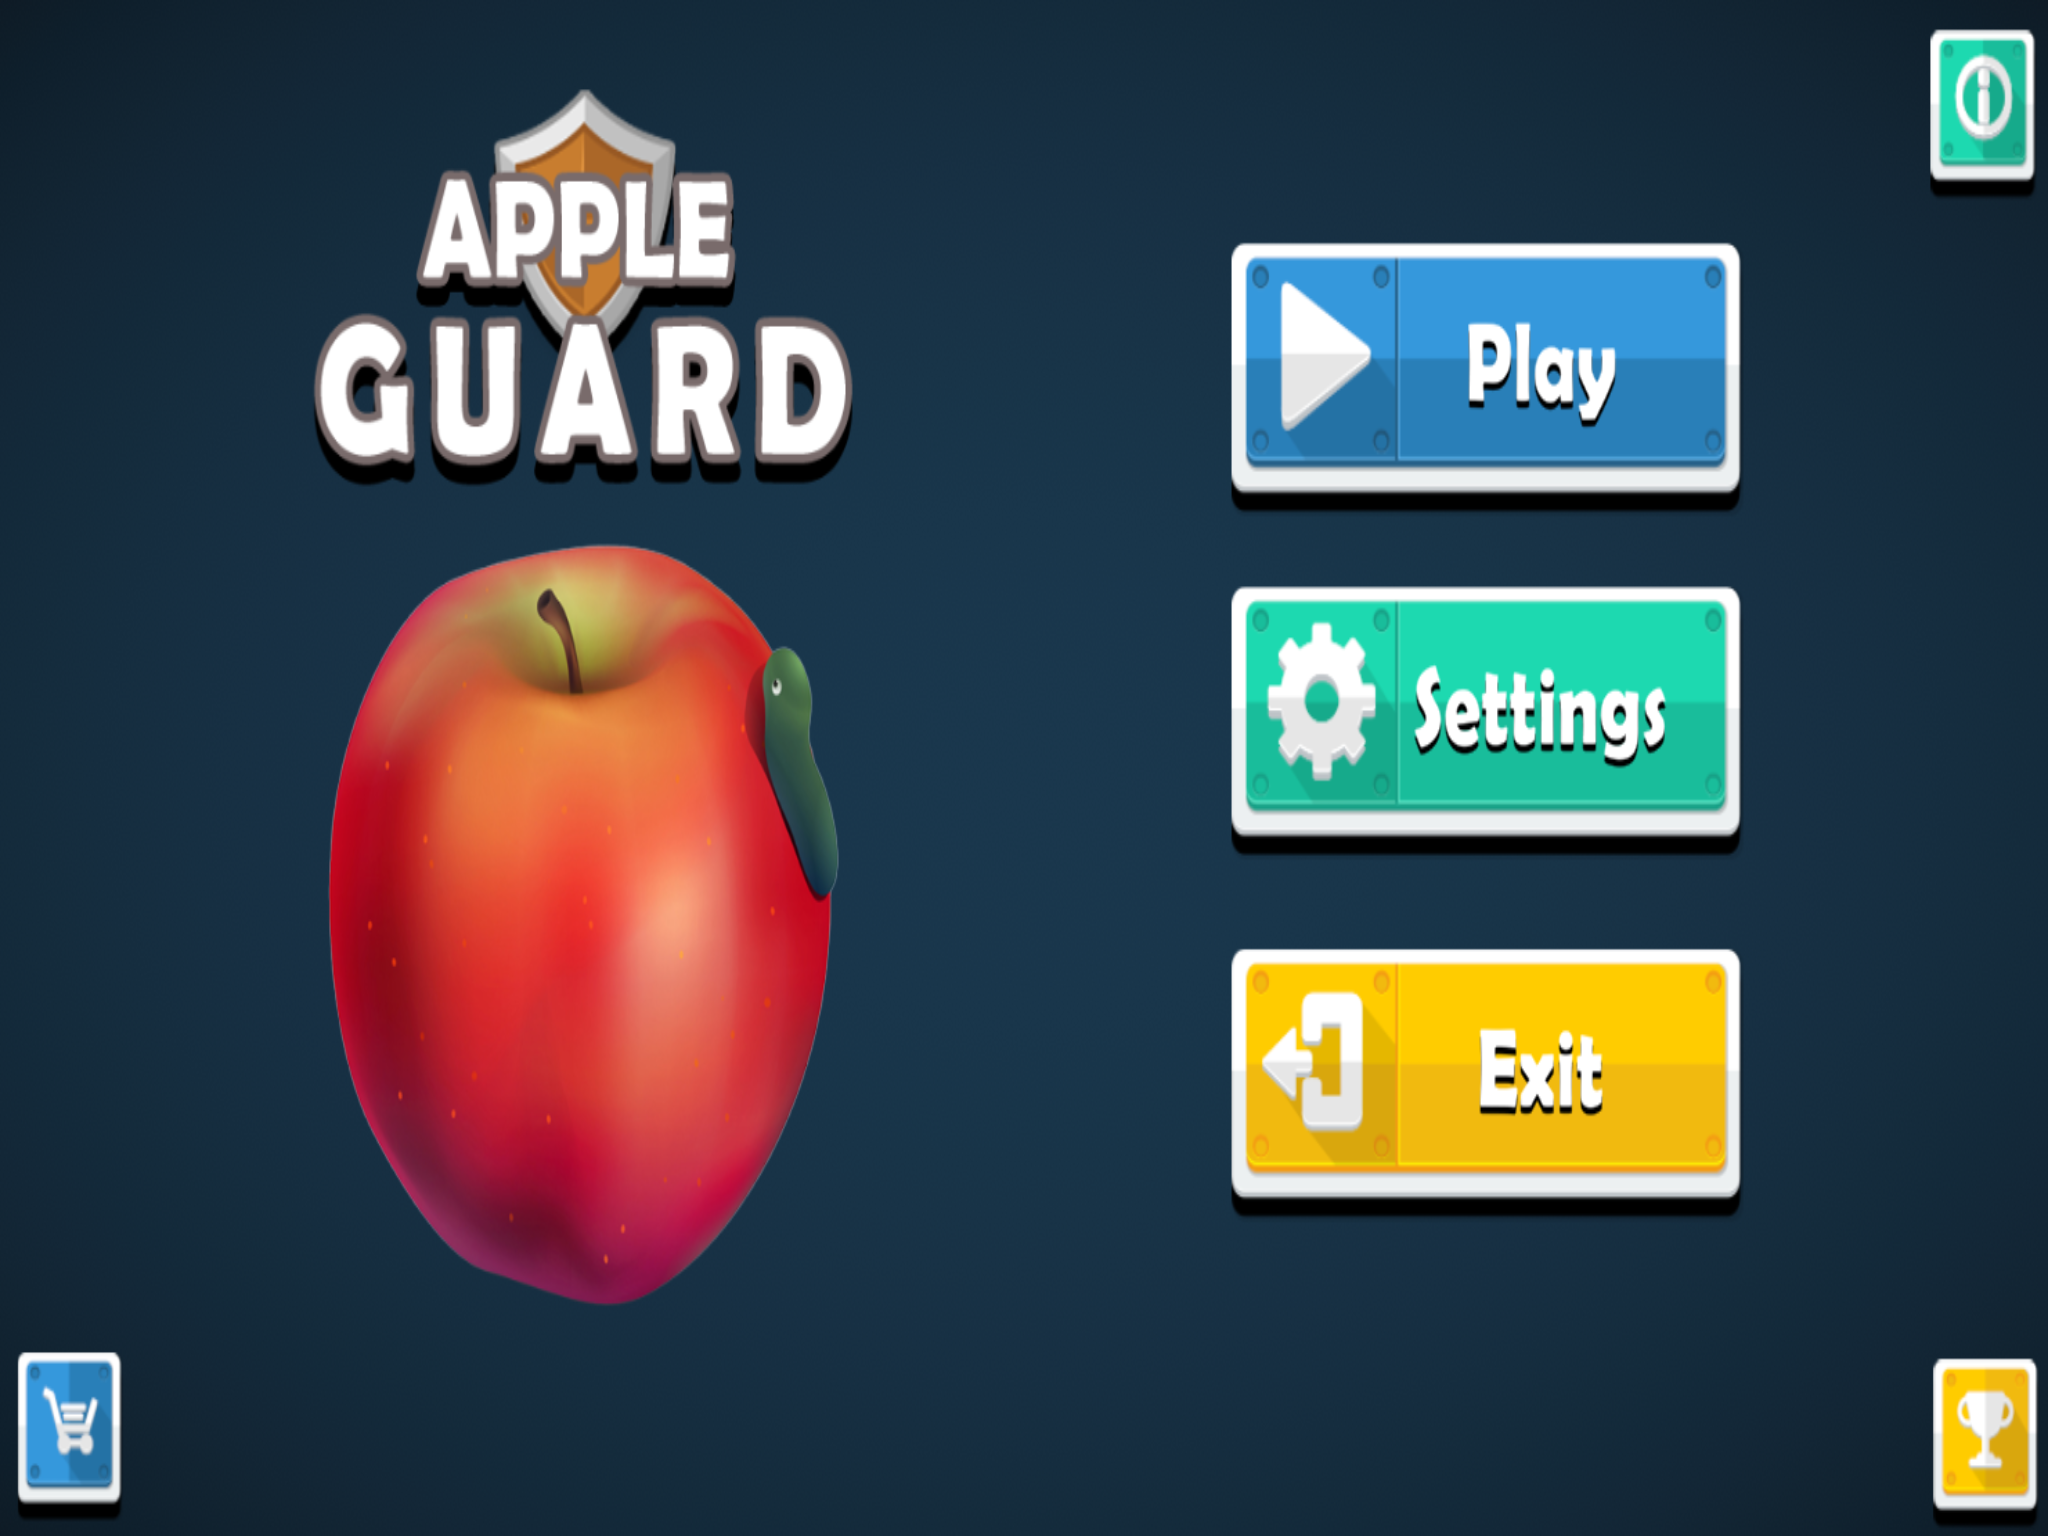 download the last version for apple RdpGuard 9.0.3